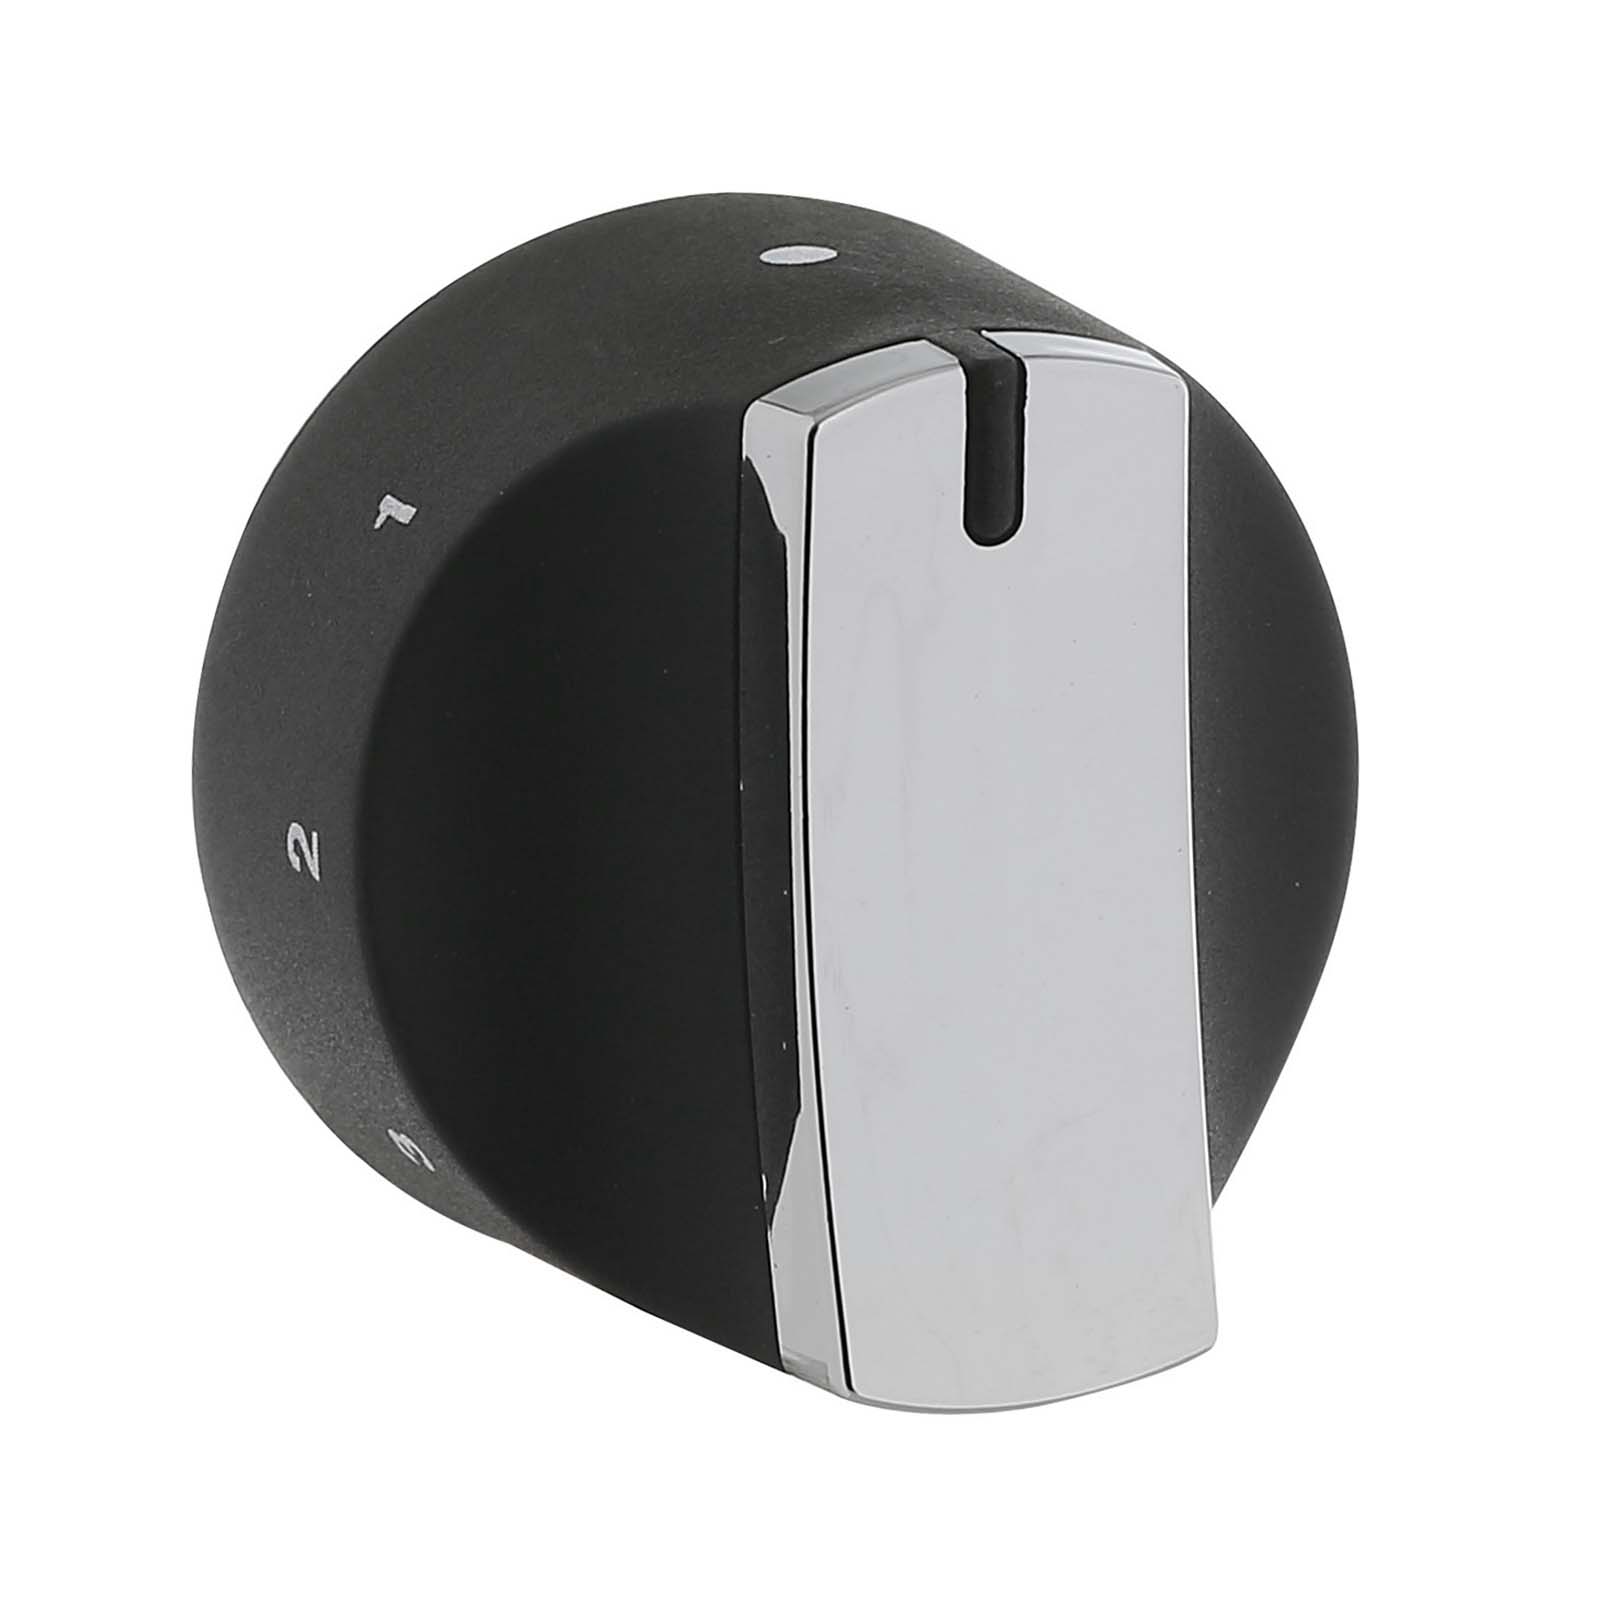 Belling Cooker Top Oven Control Knob - Black & Chrome 082585705